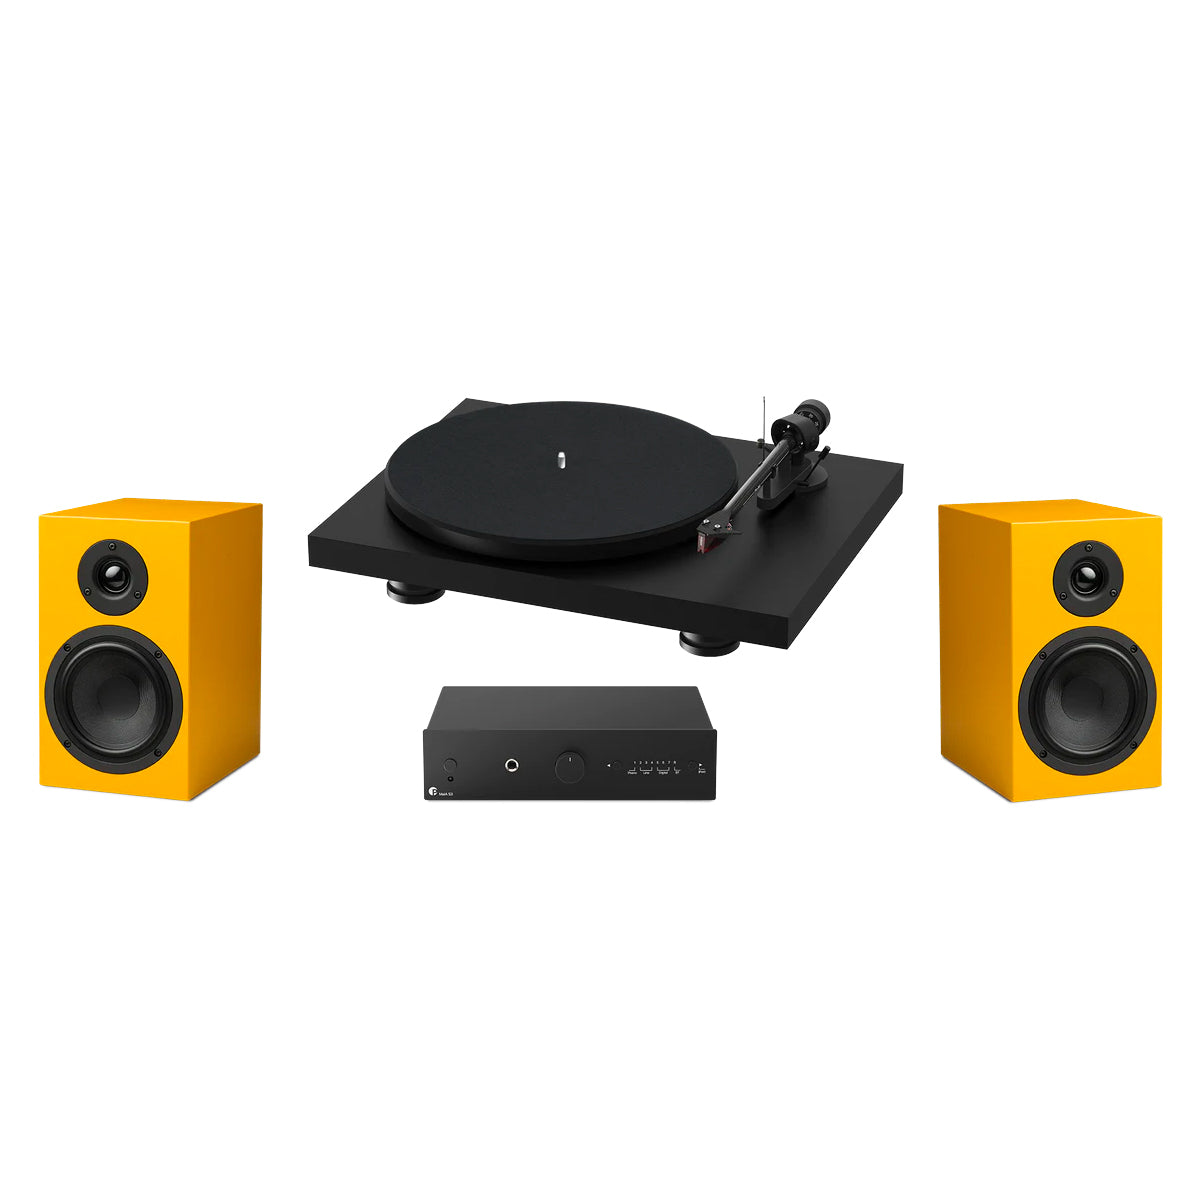 Pro-Ject Colorful Audio System - Black TT/Yellow Speakers - The Audio Experts